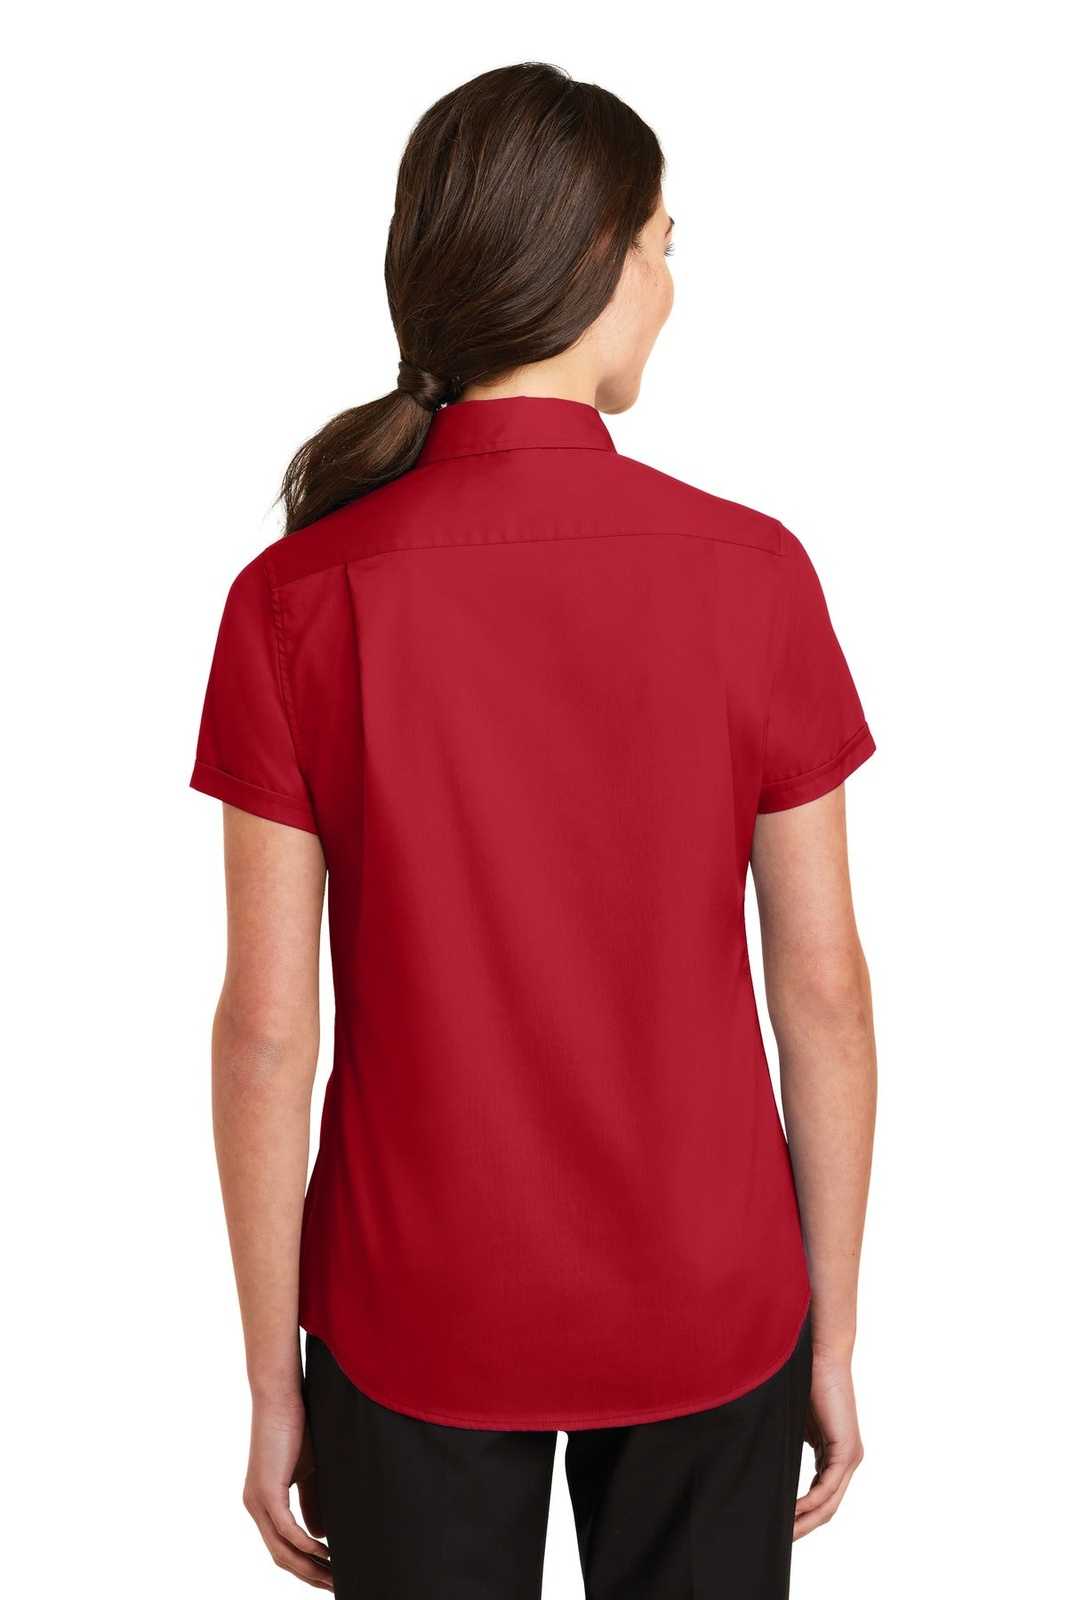 Port Authority L664 Ladies Short Sleeve Superpro Twill Shirt - Rich Red - HIT a Double - 2